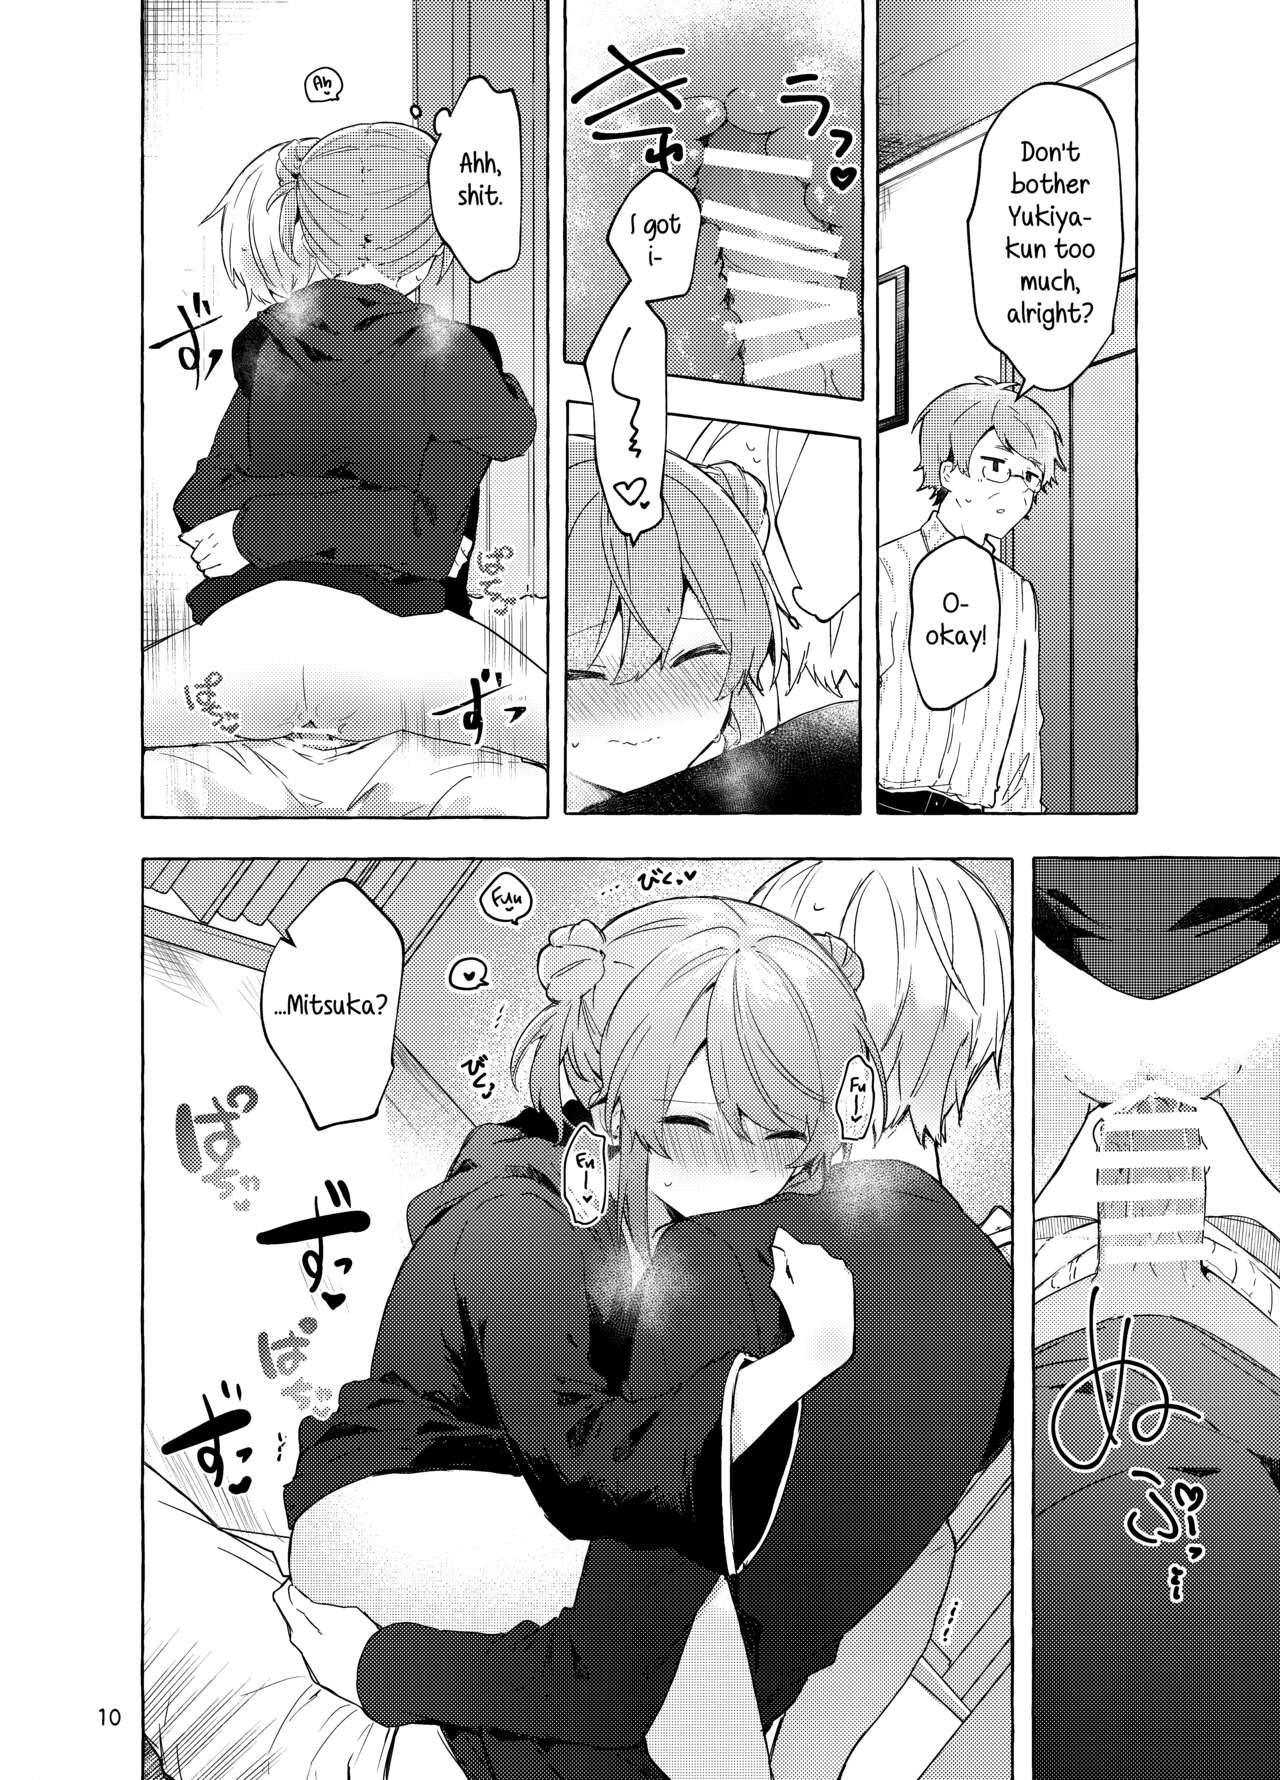 Swingers Kyou kara Waruiko. Zoku | I'll Be a Bad Kid From Now On. 2 - Original Young Tits - Page 11